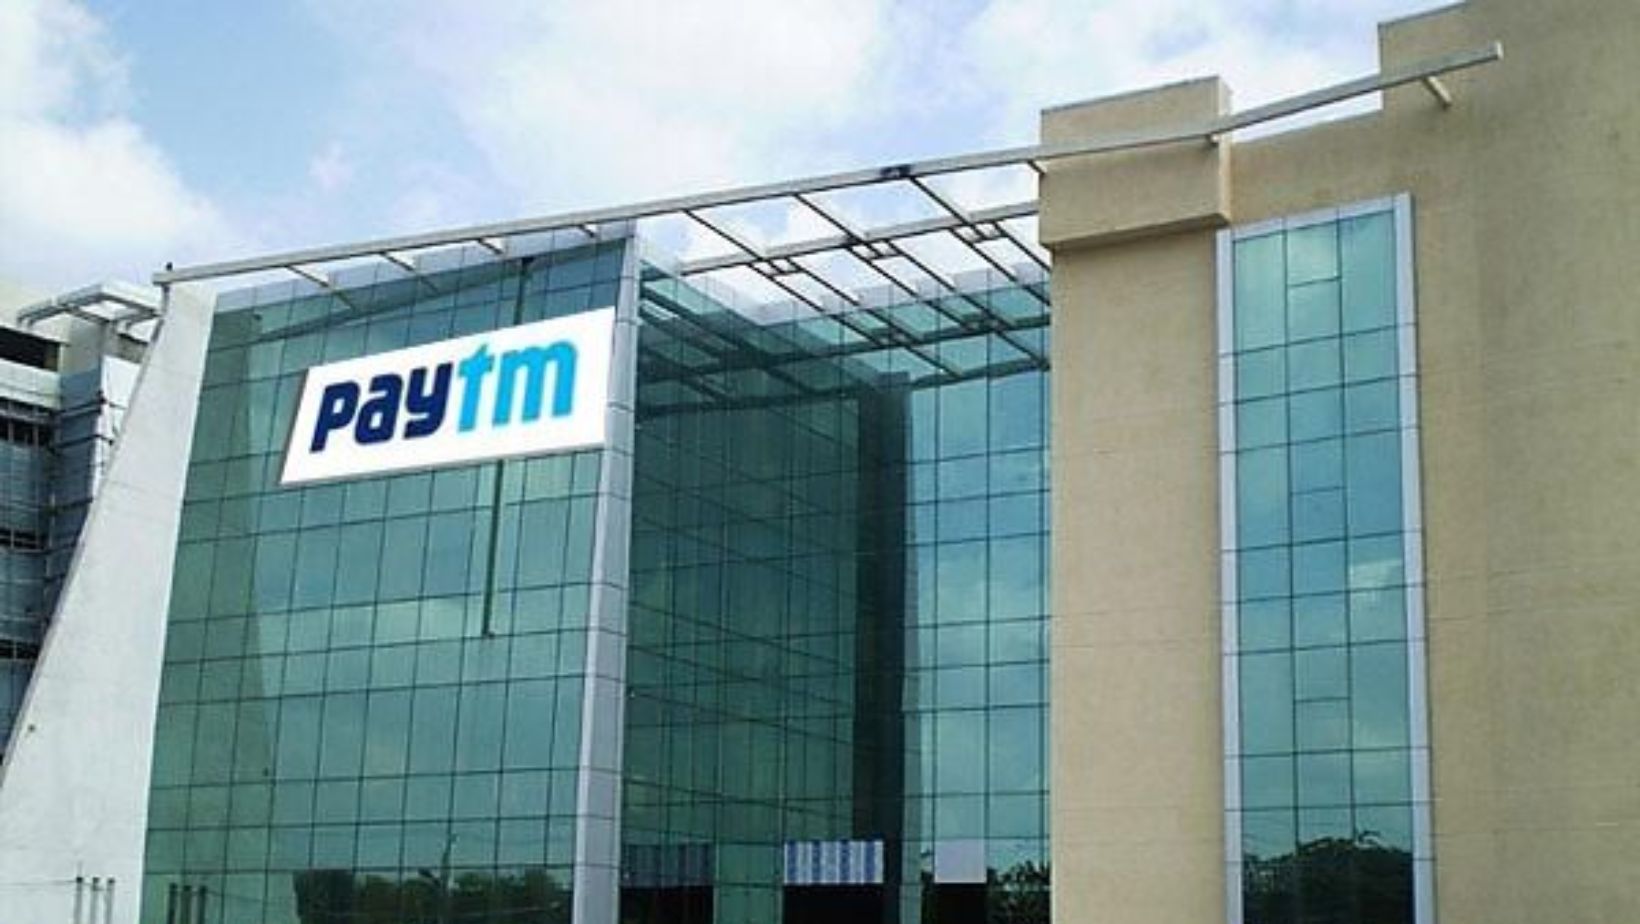 Paytm Hiring Field Sales Job for Freshers Apply Now